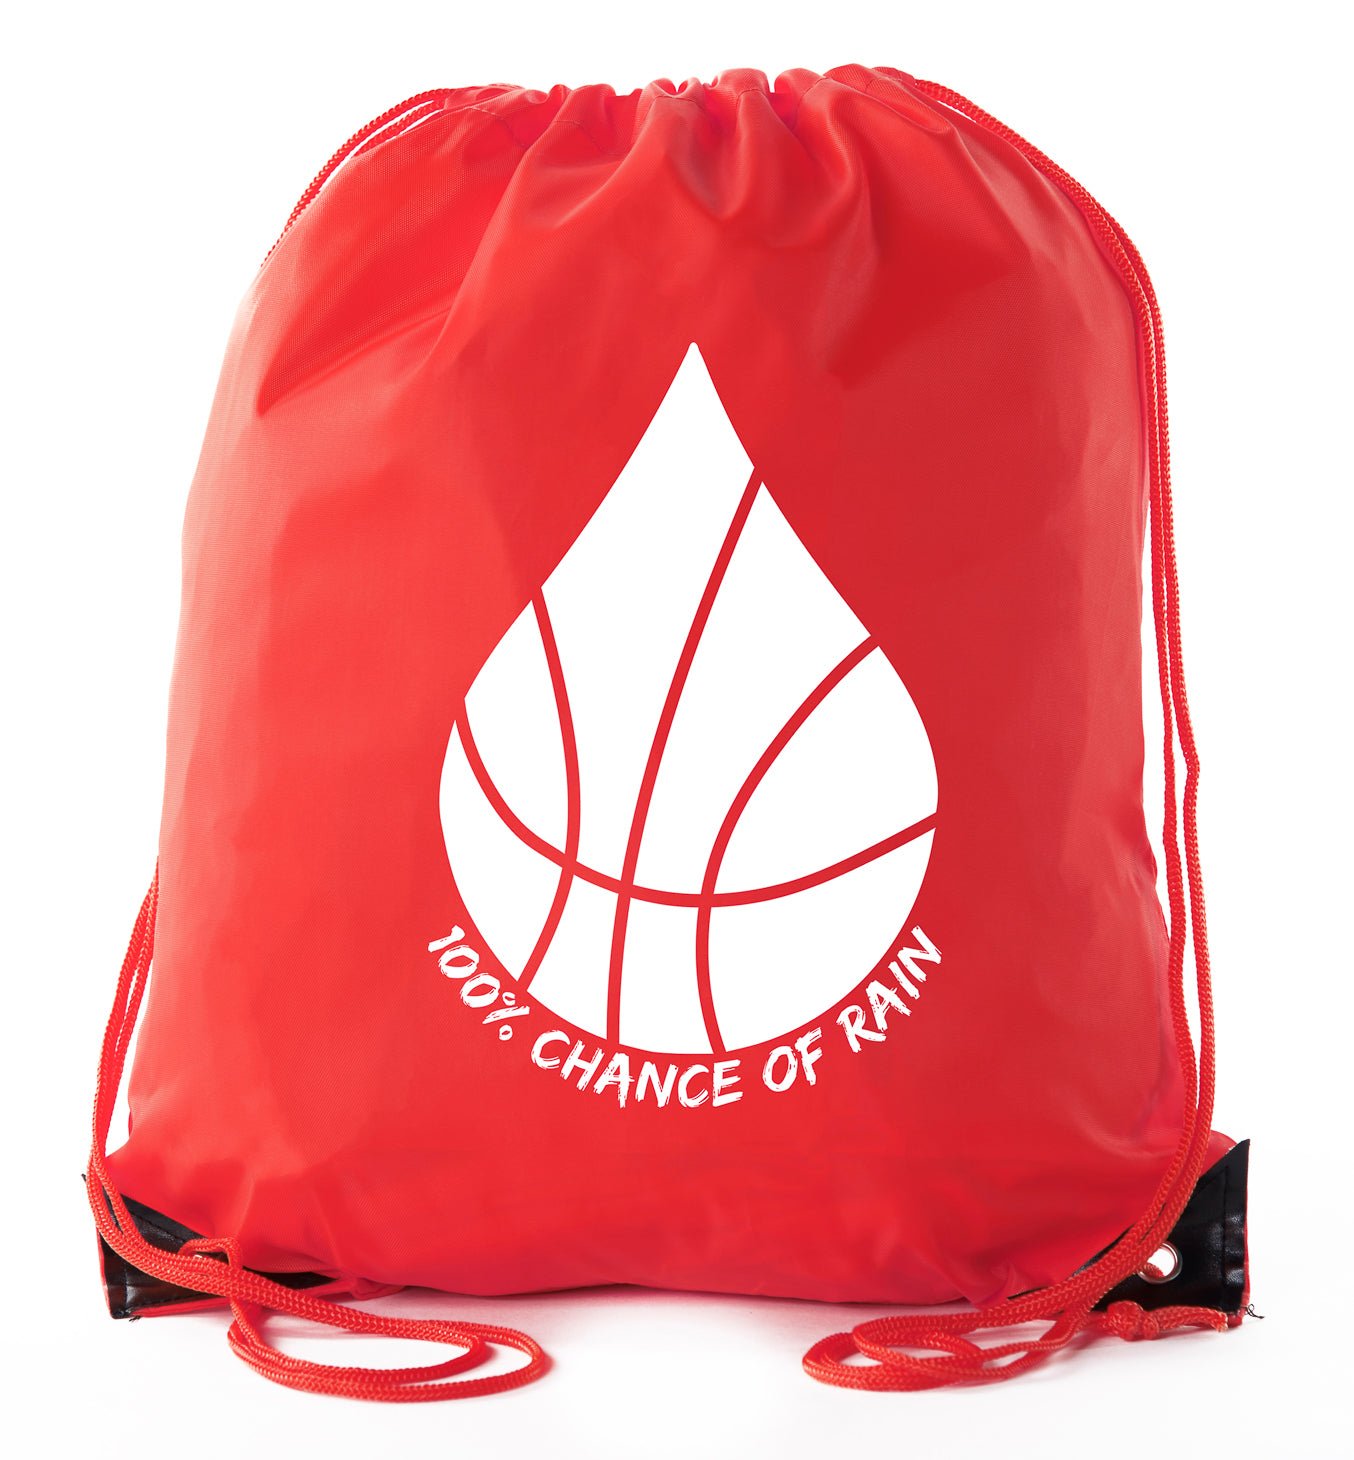 Accessory - Mato & Hash Basketball Drawstring Bags With 3,6, And 10 Pack Bulk Options - Chance Of Rain